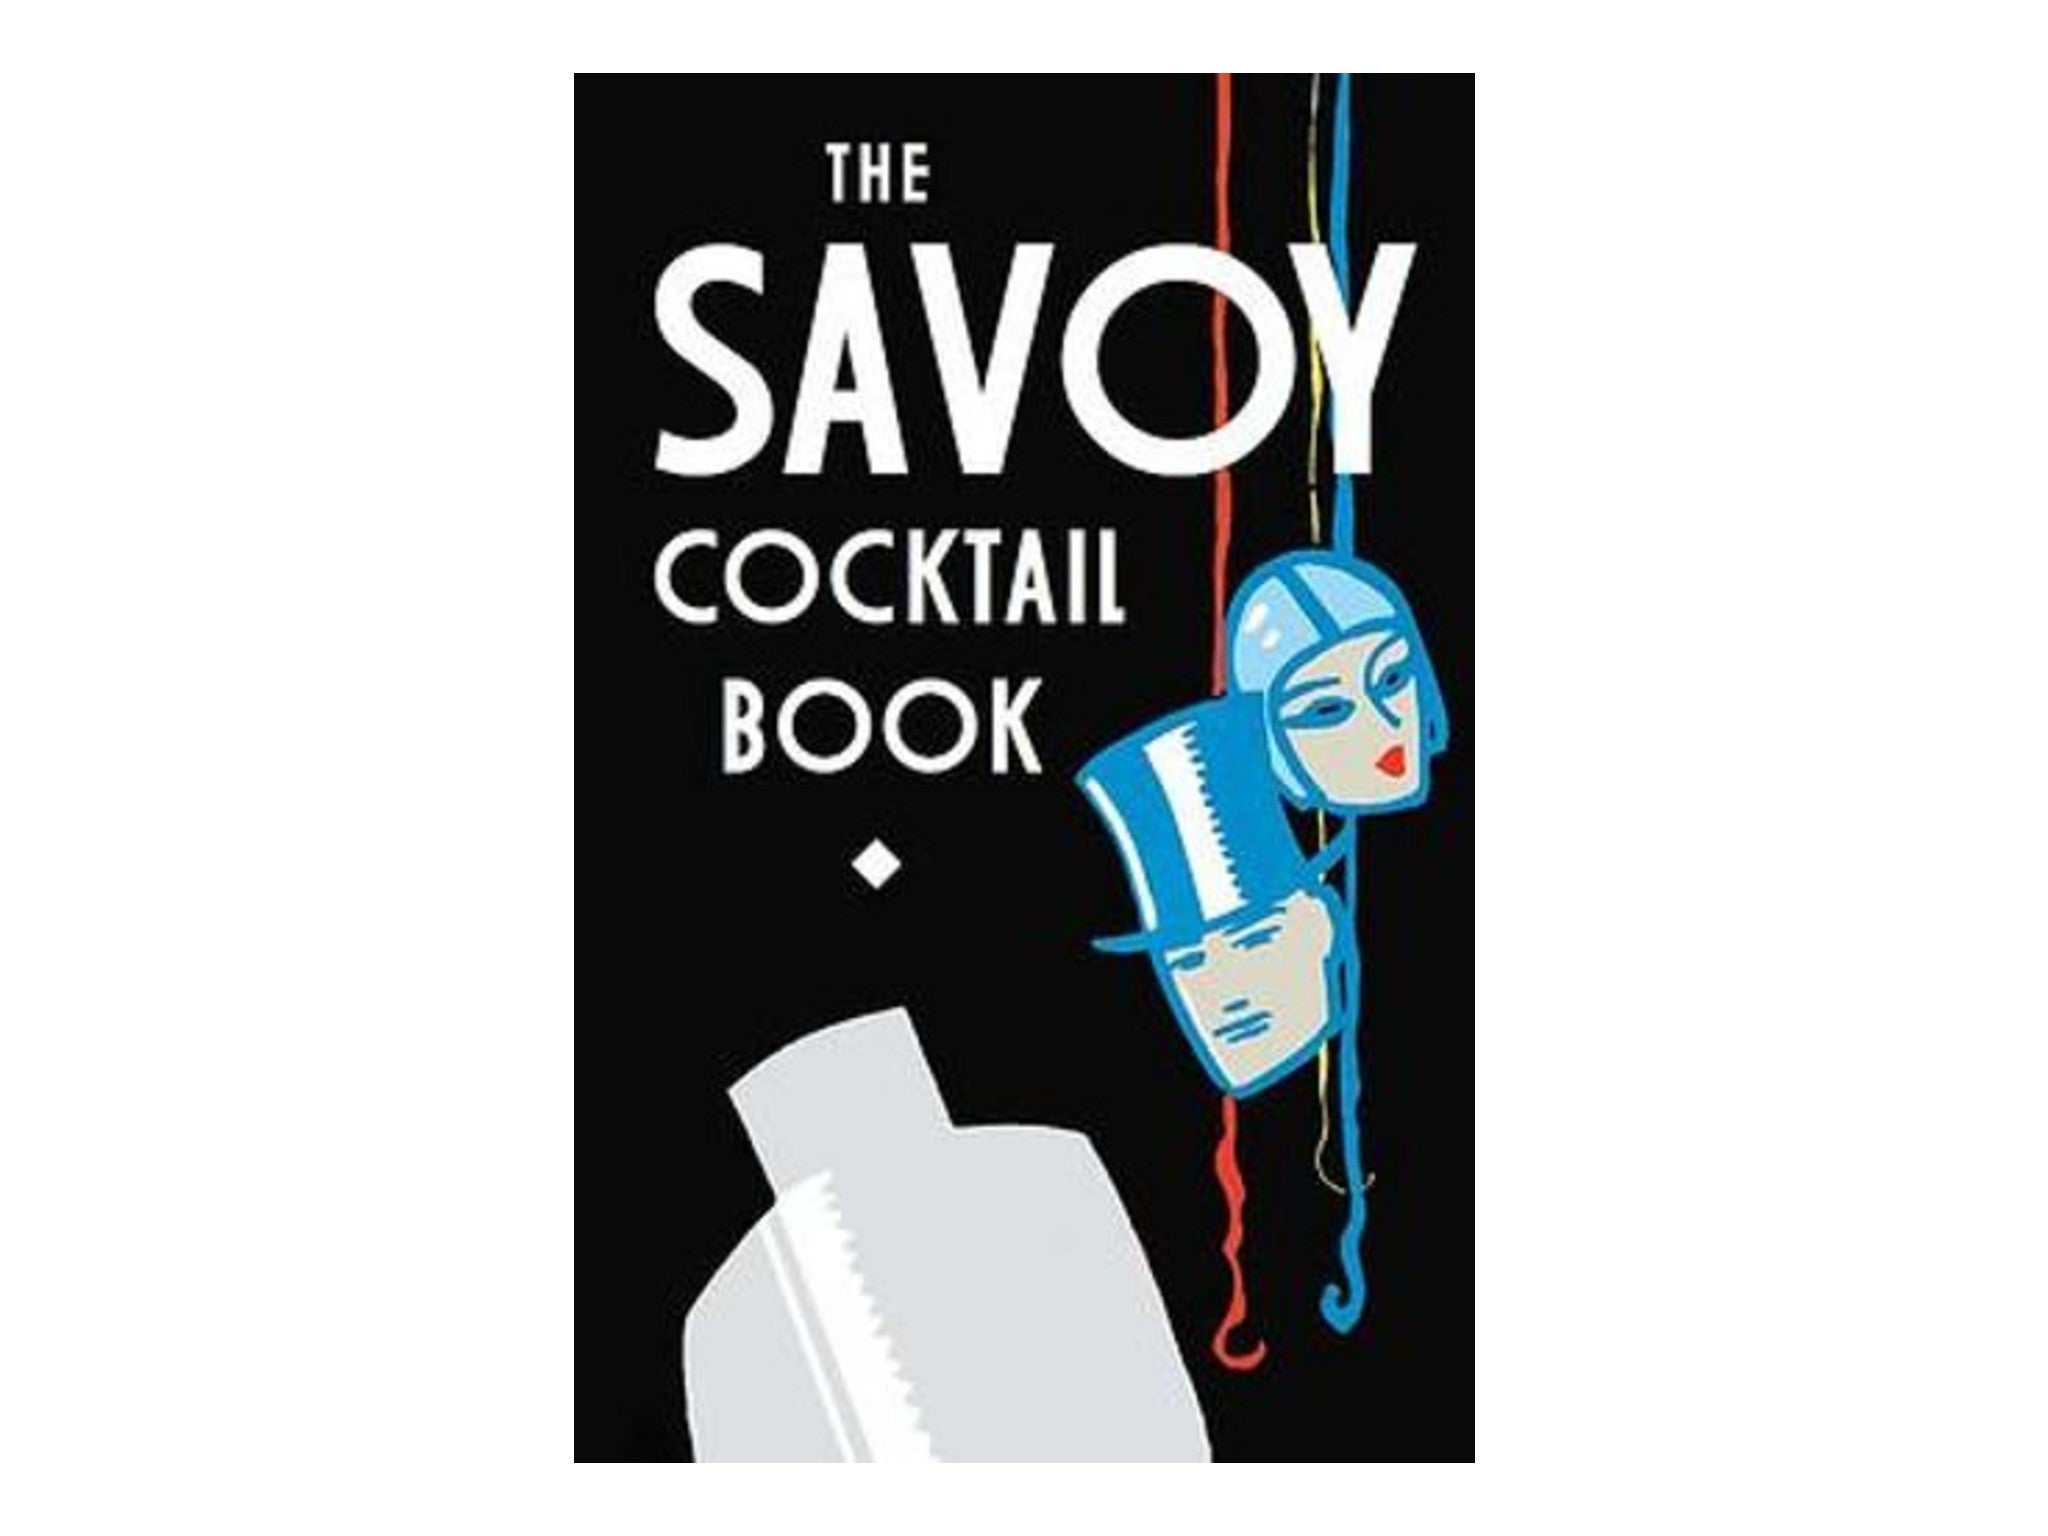 The Savoy Cocktail Book’ by Harry Craddock indybest.jpeg